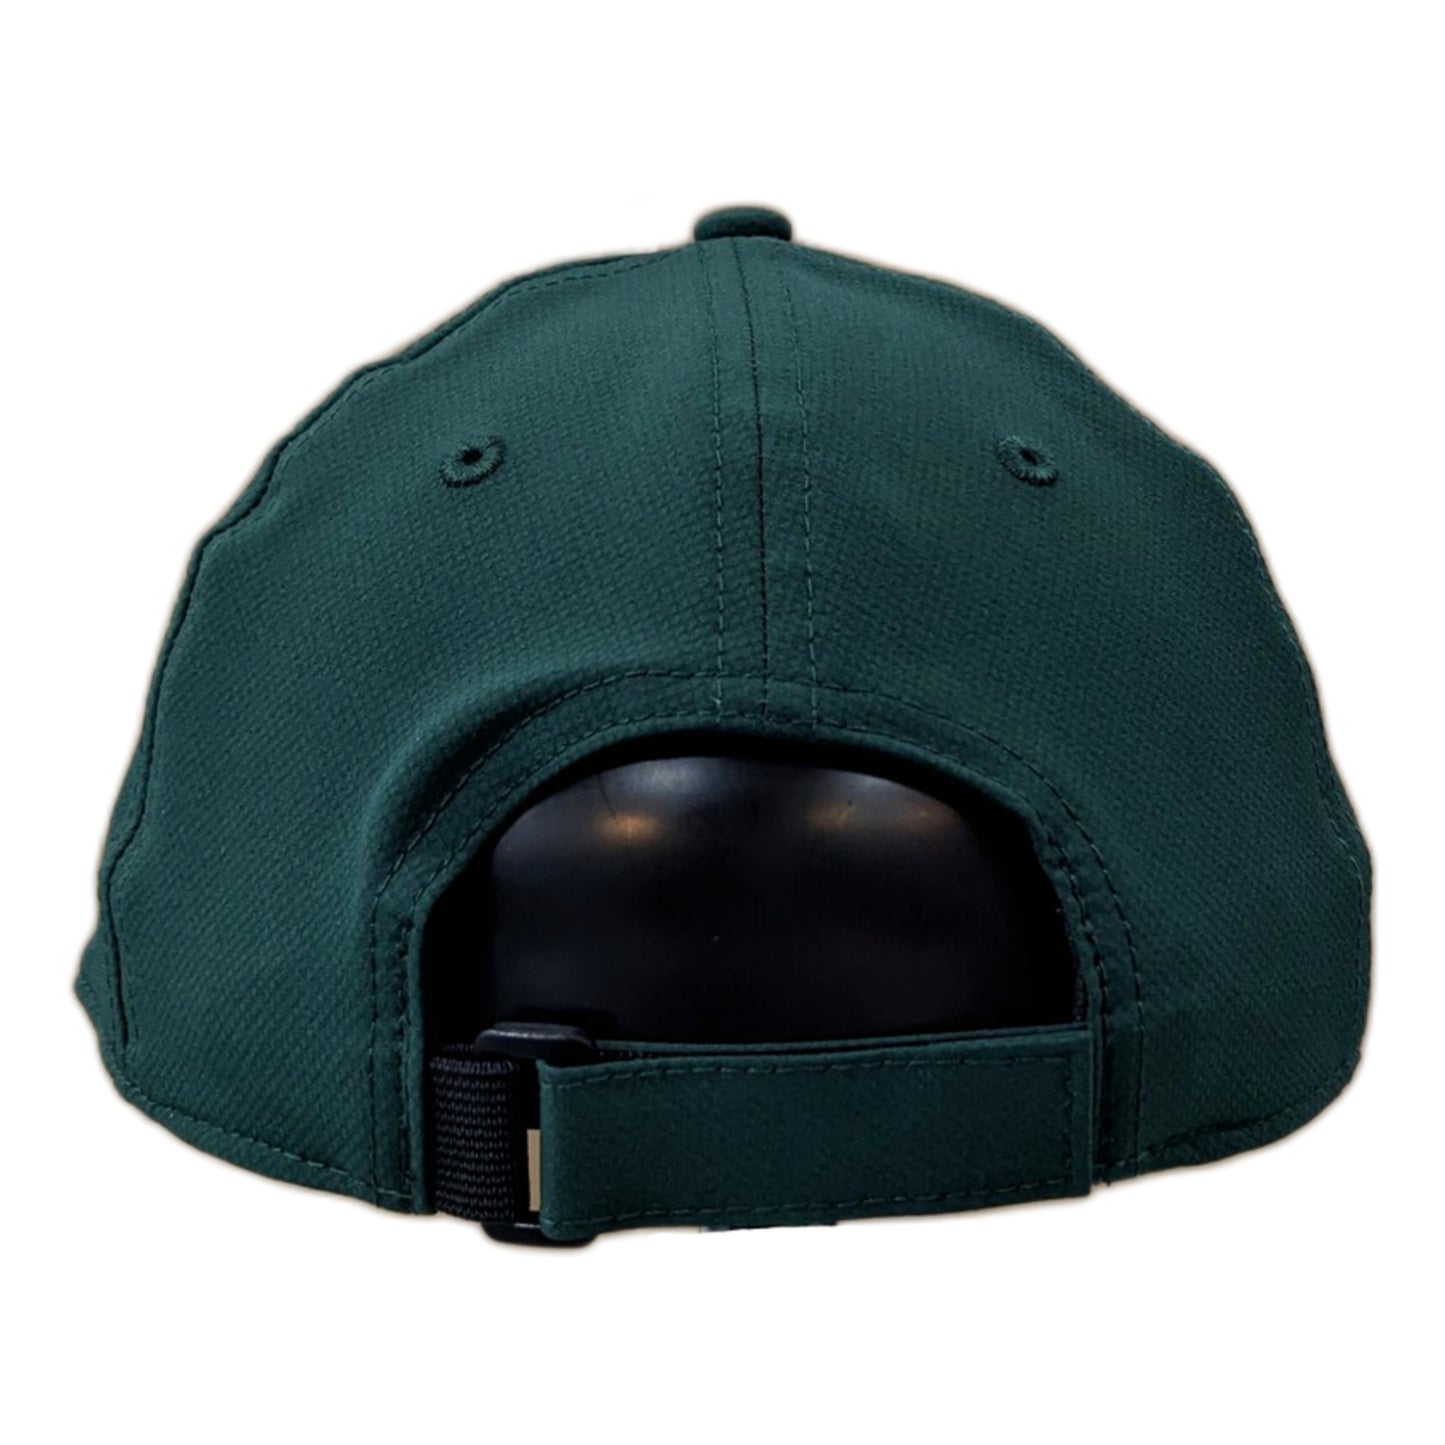 Men's Michigan State Spartans Top of the World Green Performance Adjustable Hat